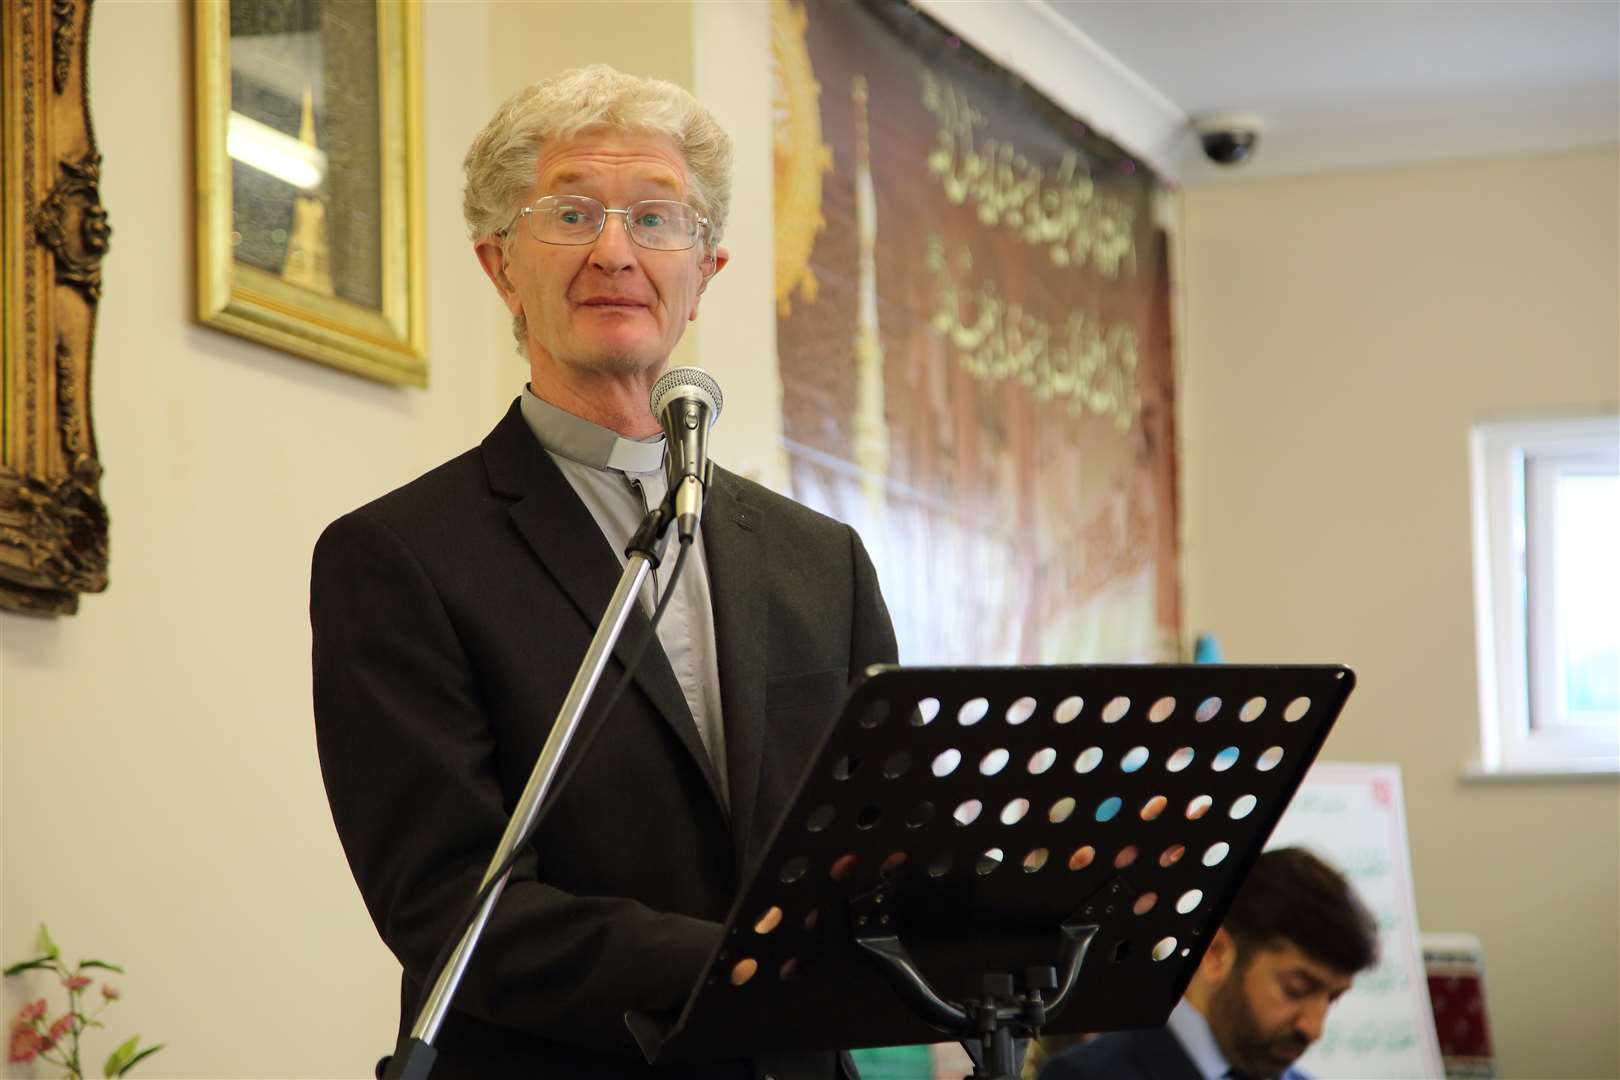 Reverend Richard Martin spoke about how there are no religions that promote violence. Picture: Sarah Knight